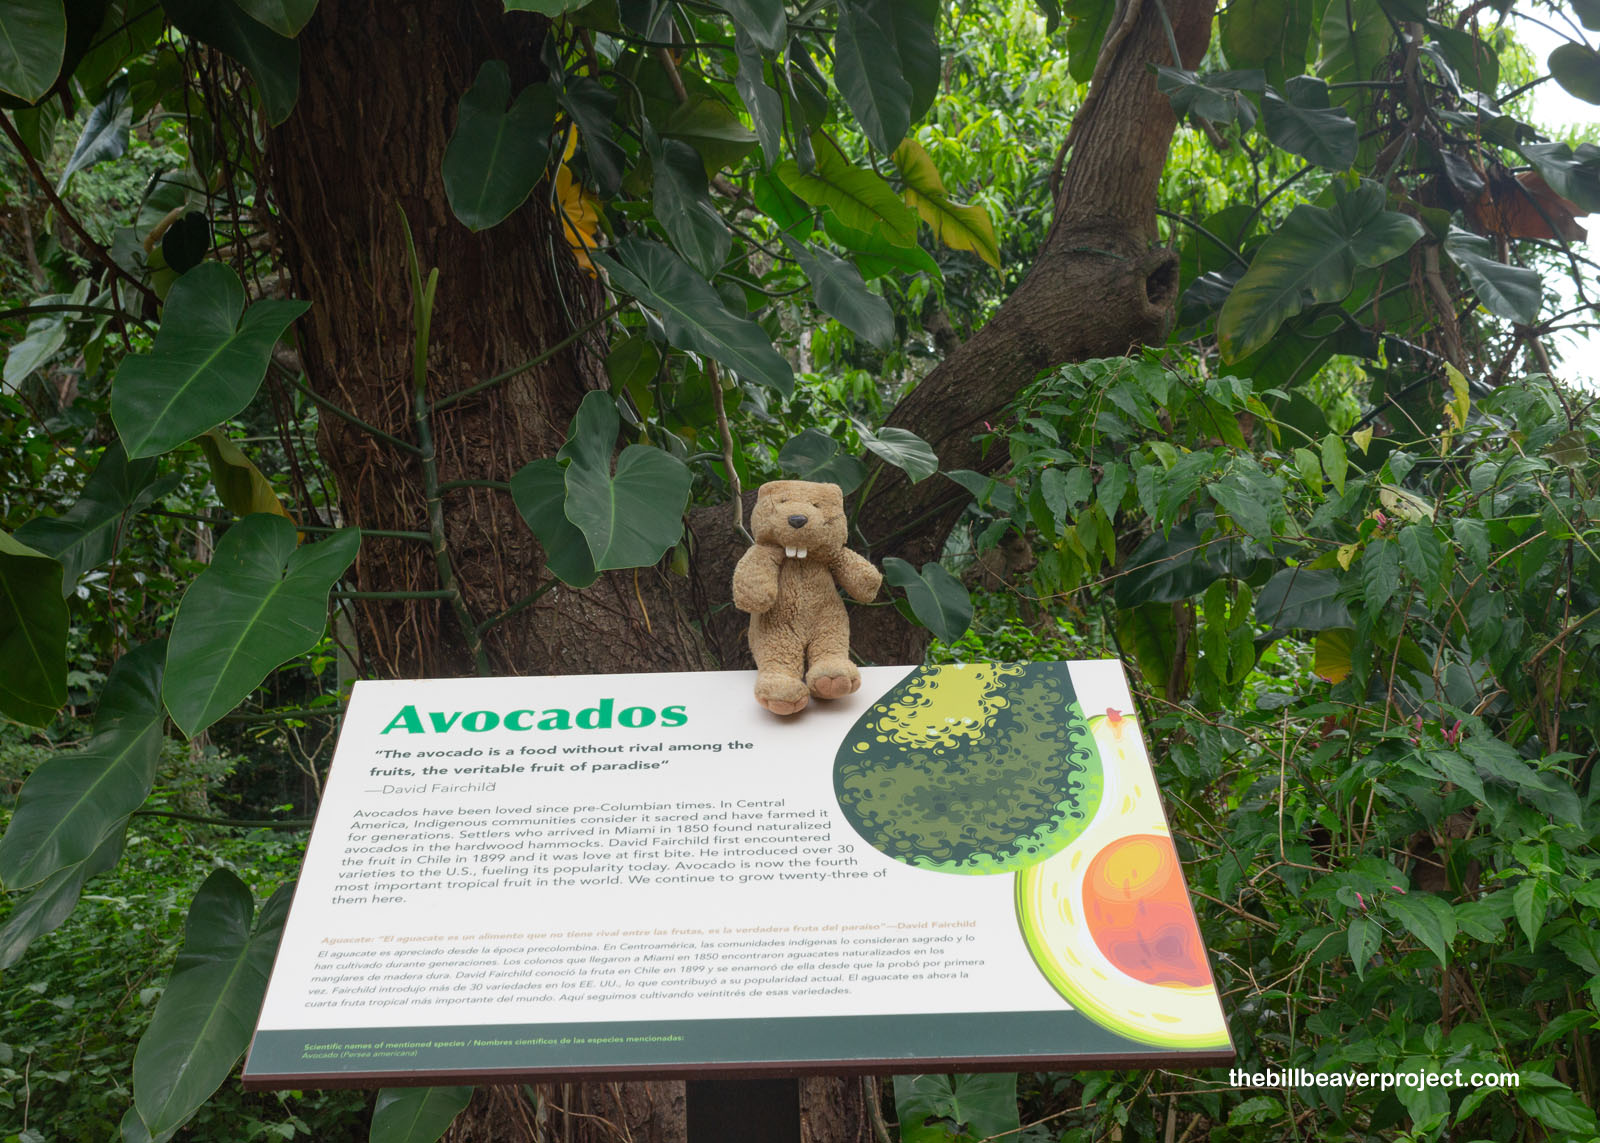 Avocados were just one of the fruits introduced here!